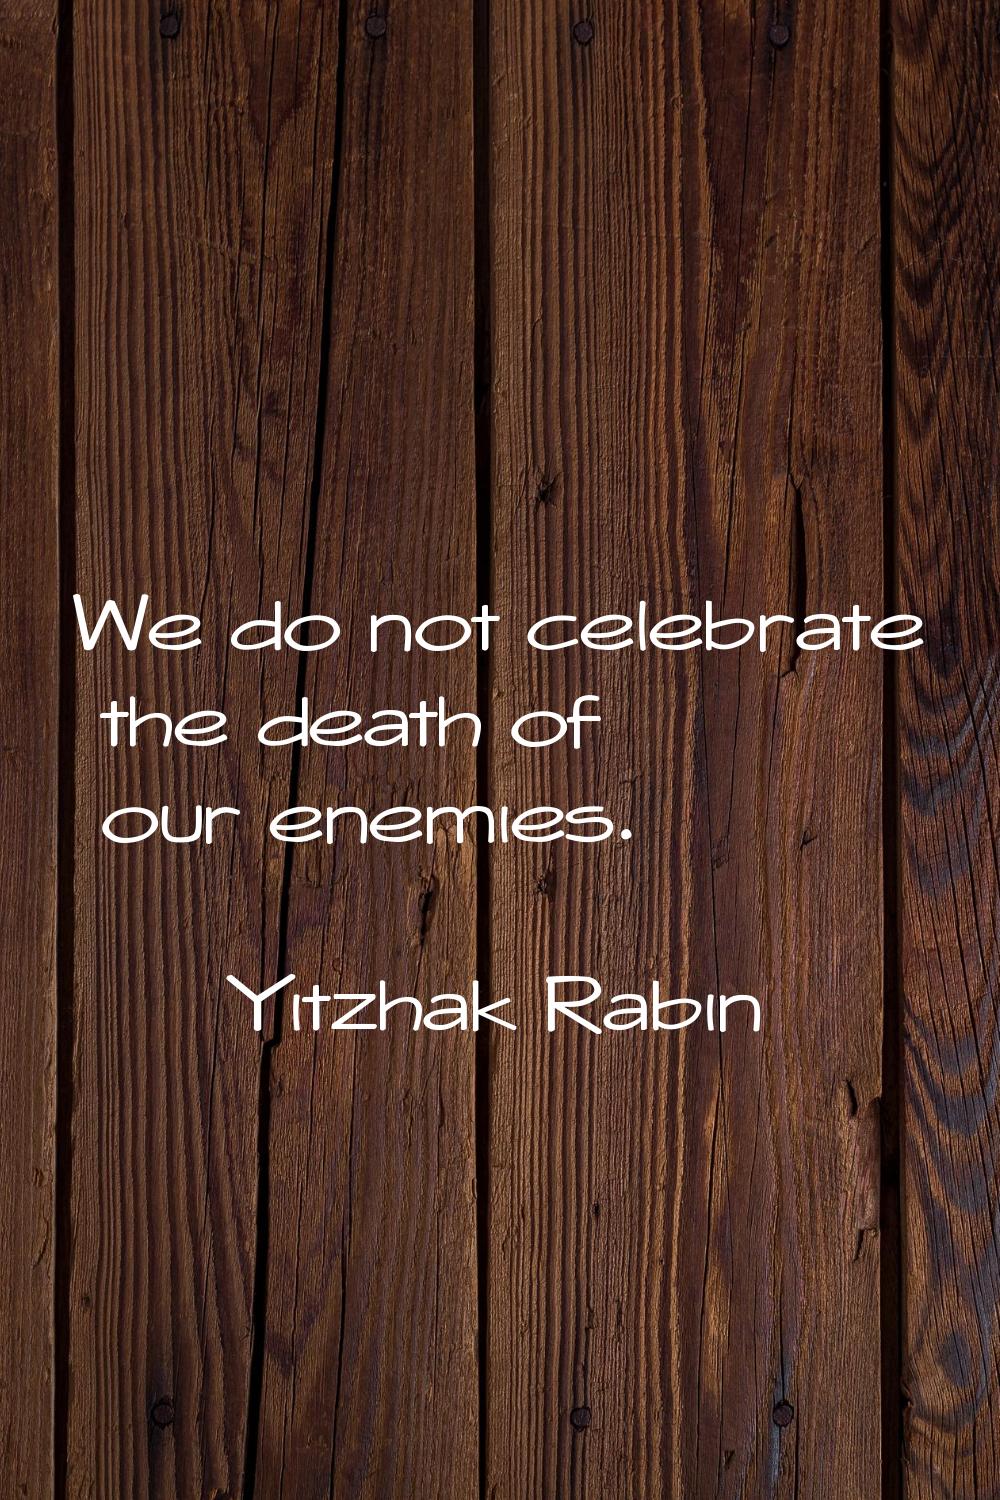 We do not celebrate the death of our enemies.